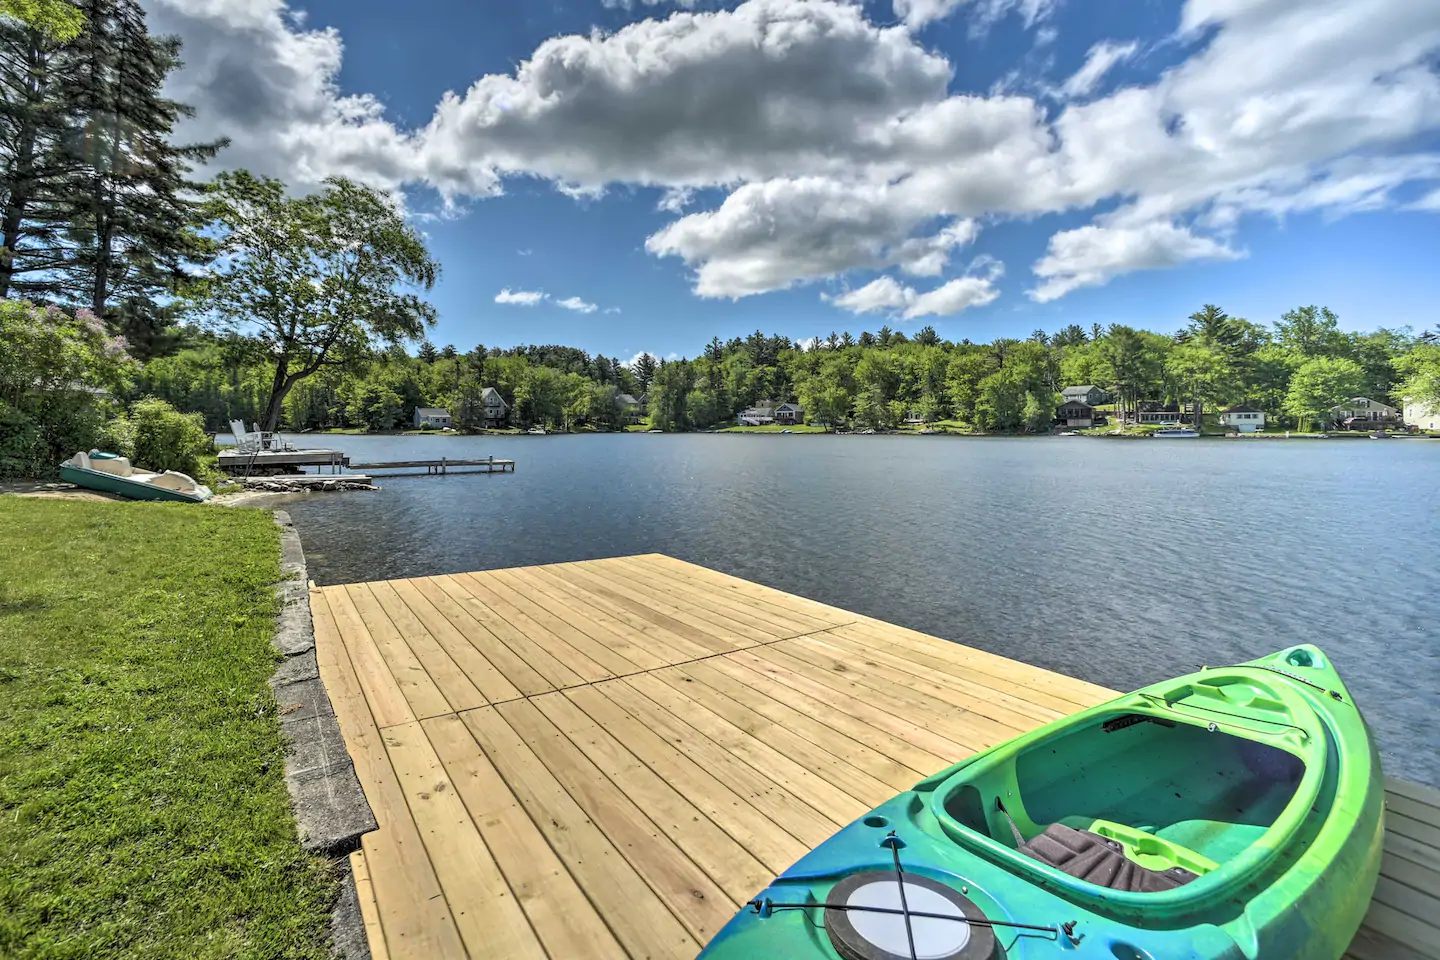 Blue and green kayak sitting on a wooden dock by the lake. The lake is surrounded by a forest in the distance.